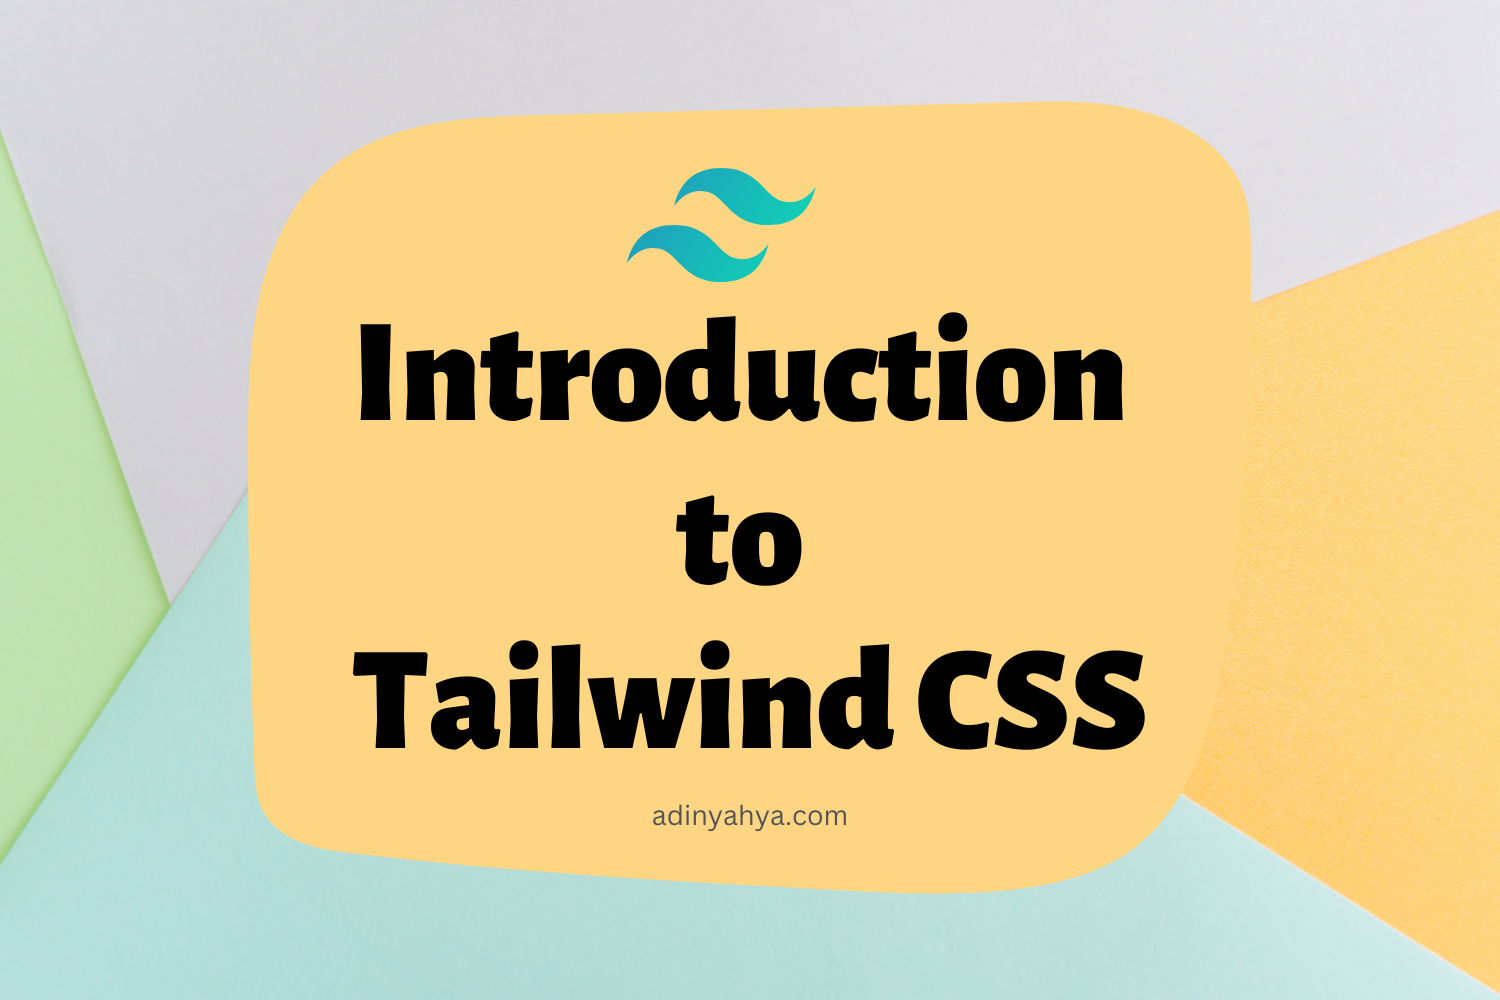 Introduction to Tailwind CSS